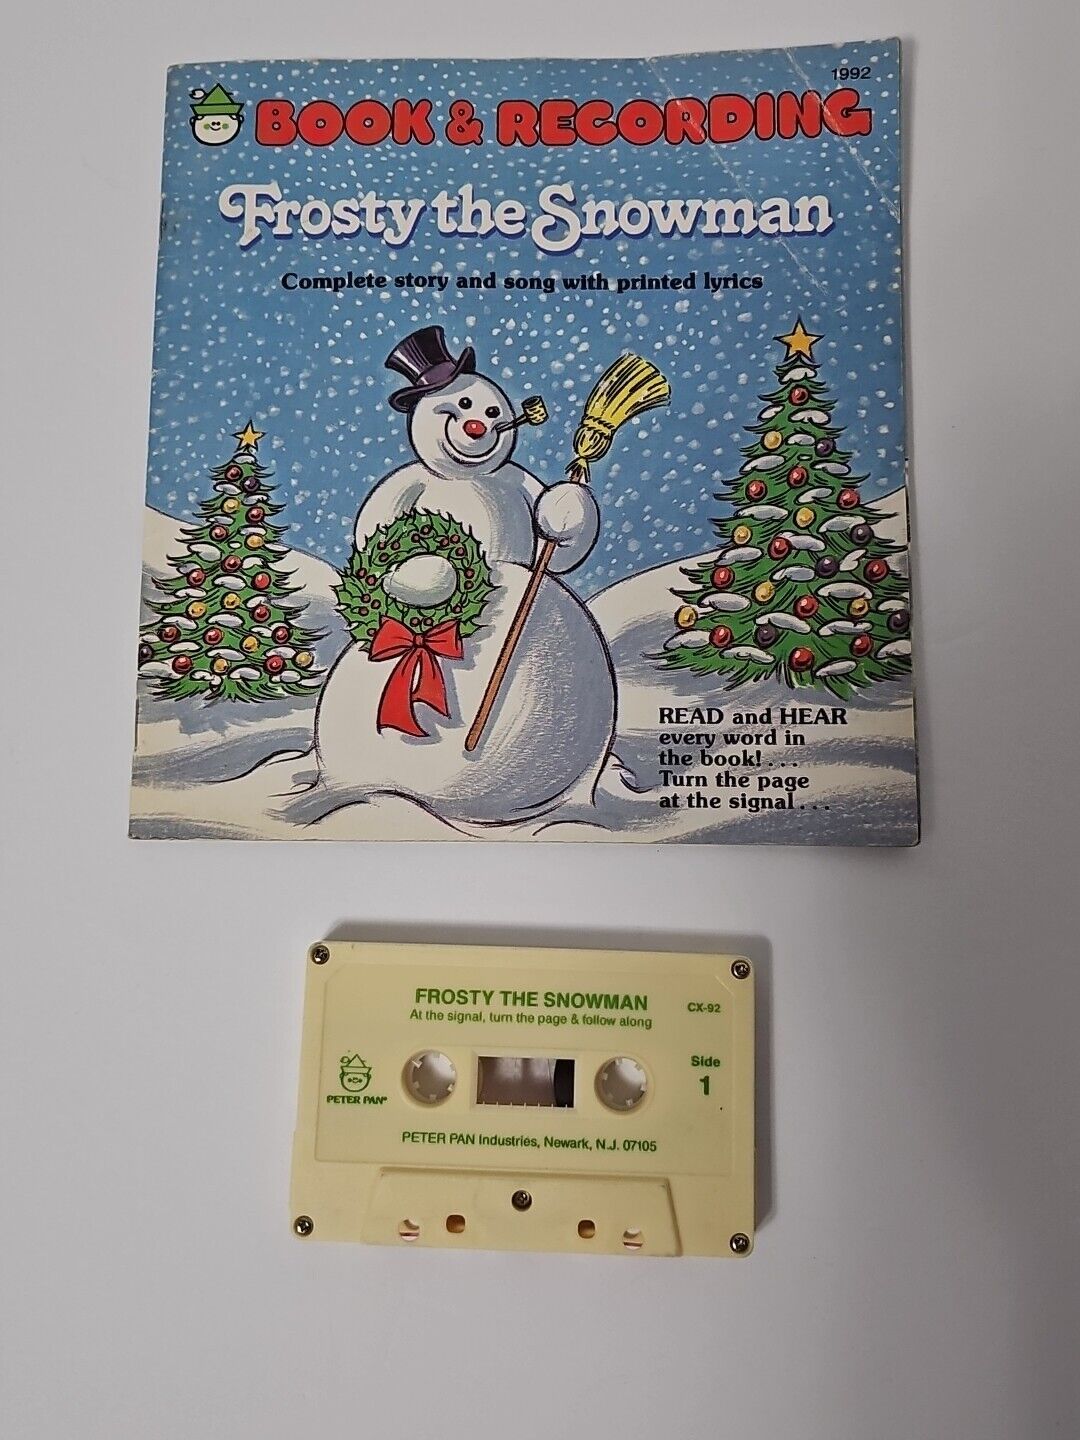 Frosty the Snowman Book and Cassette Tape   Vintage 1981 